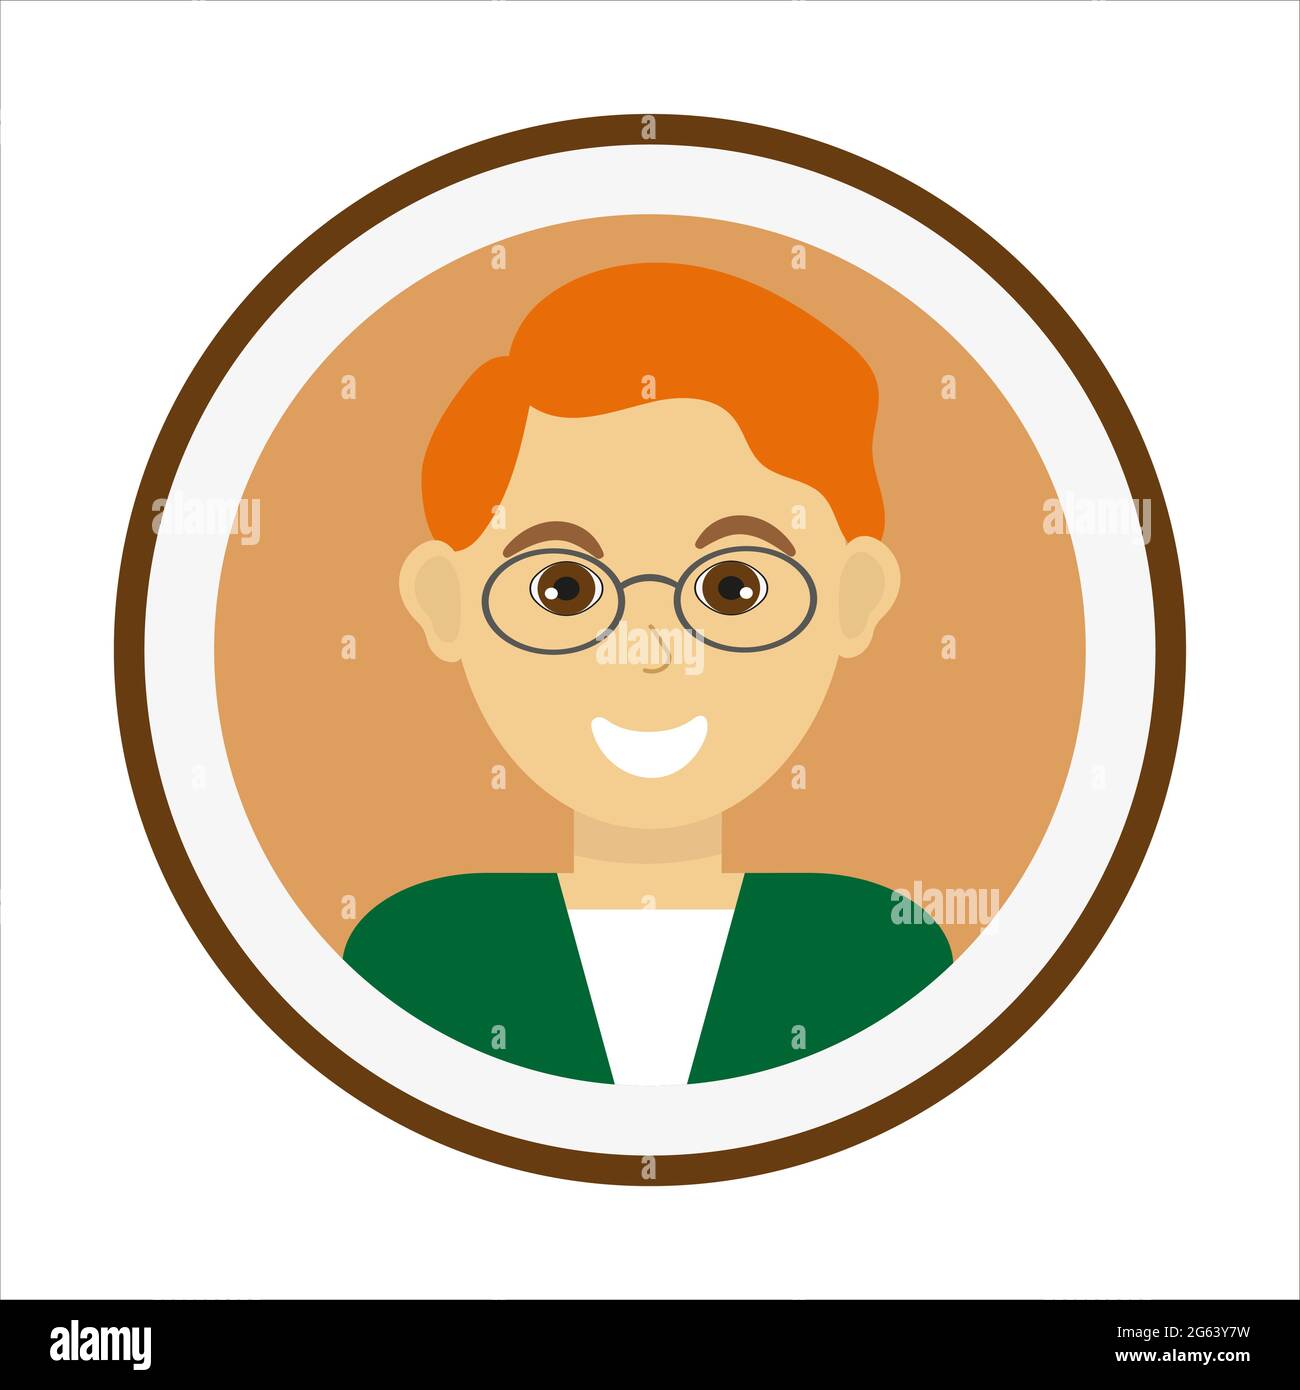 Smiling man face with red hair and wearing glasses Stock Vector